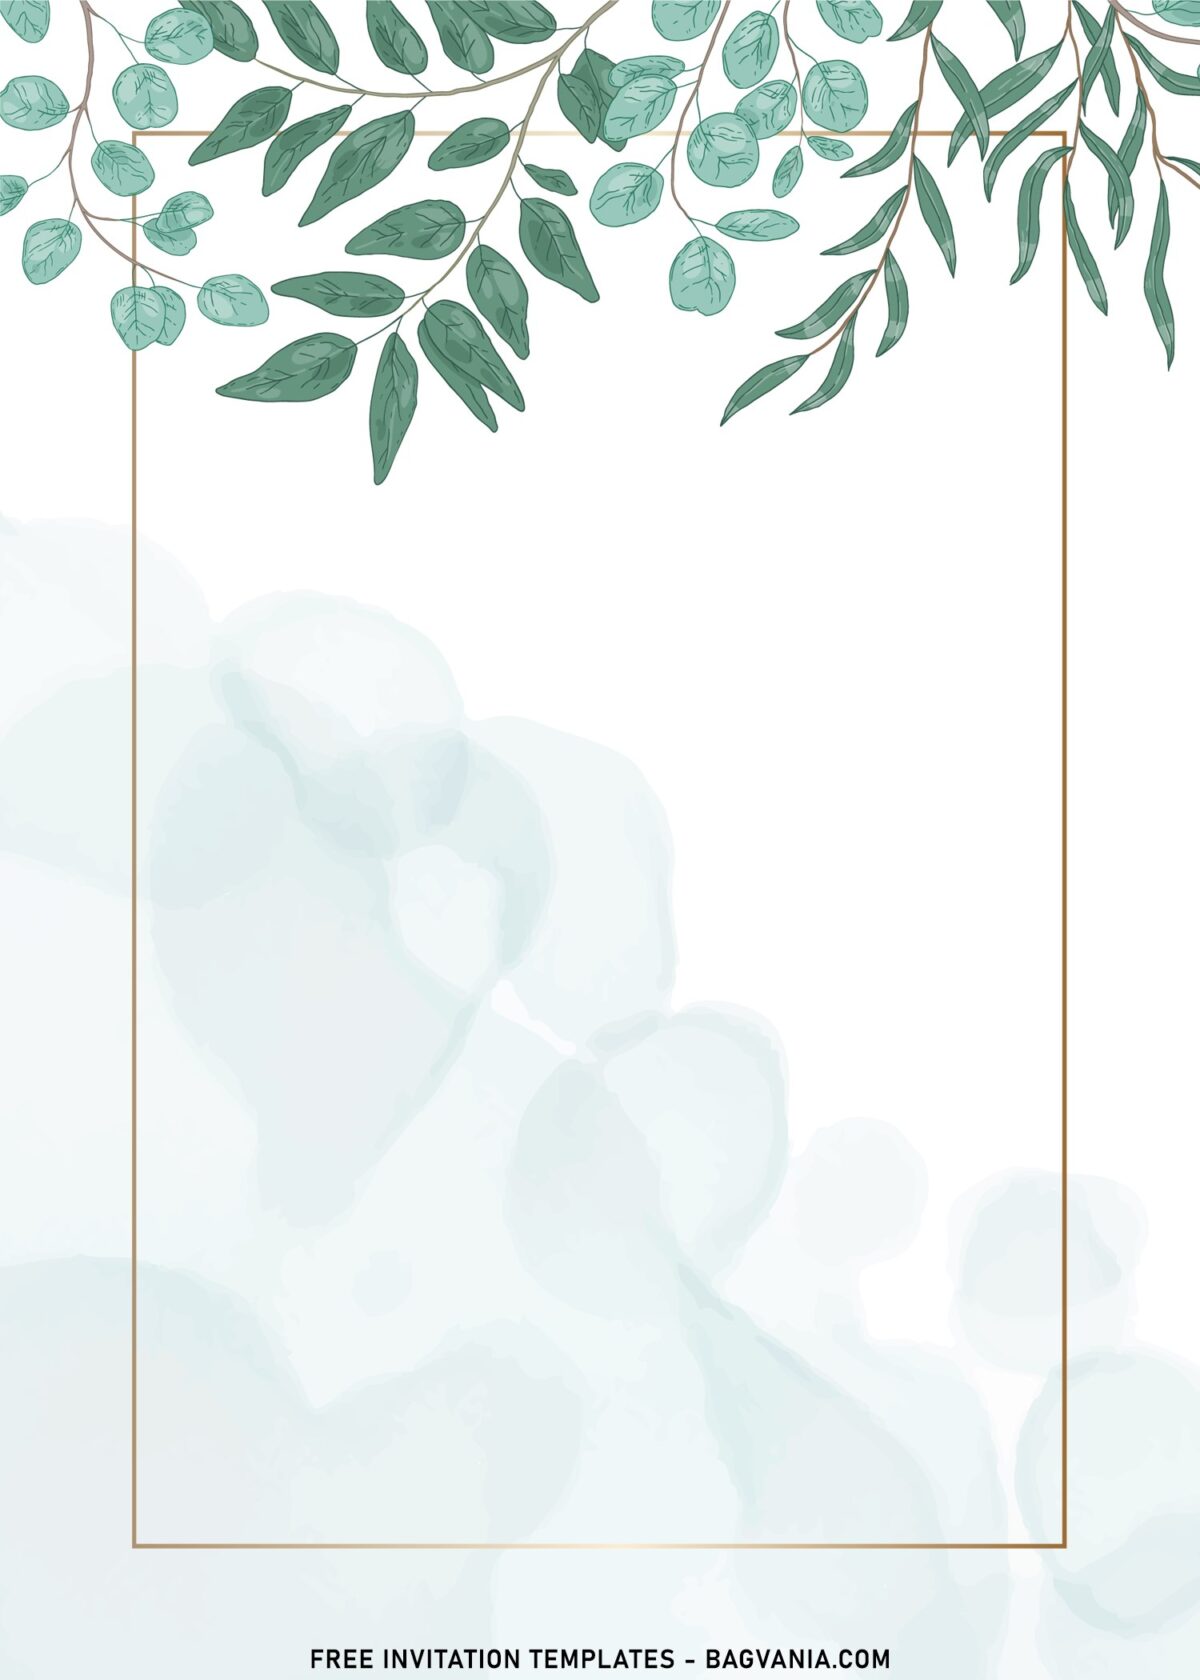 11+ Beautiful Greenery And Willow Branches Birthday Invitation Templates with watercolor backdrop